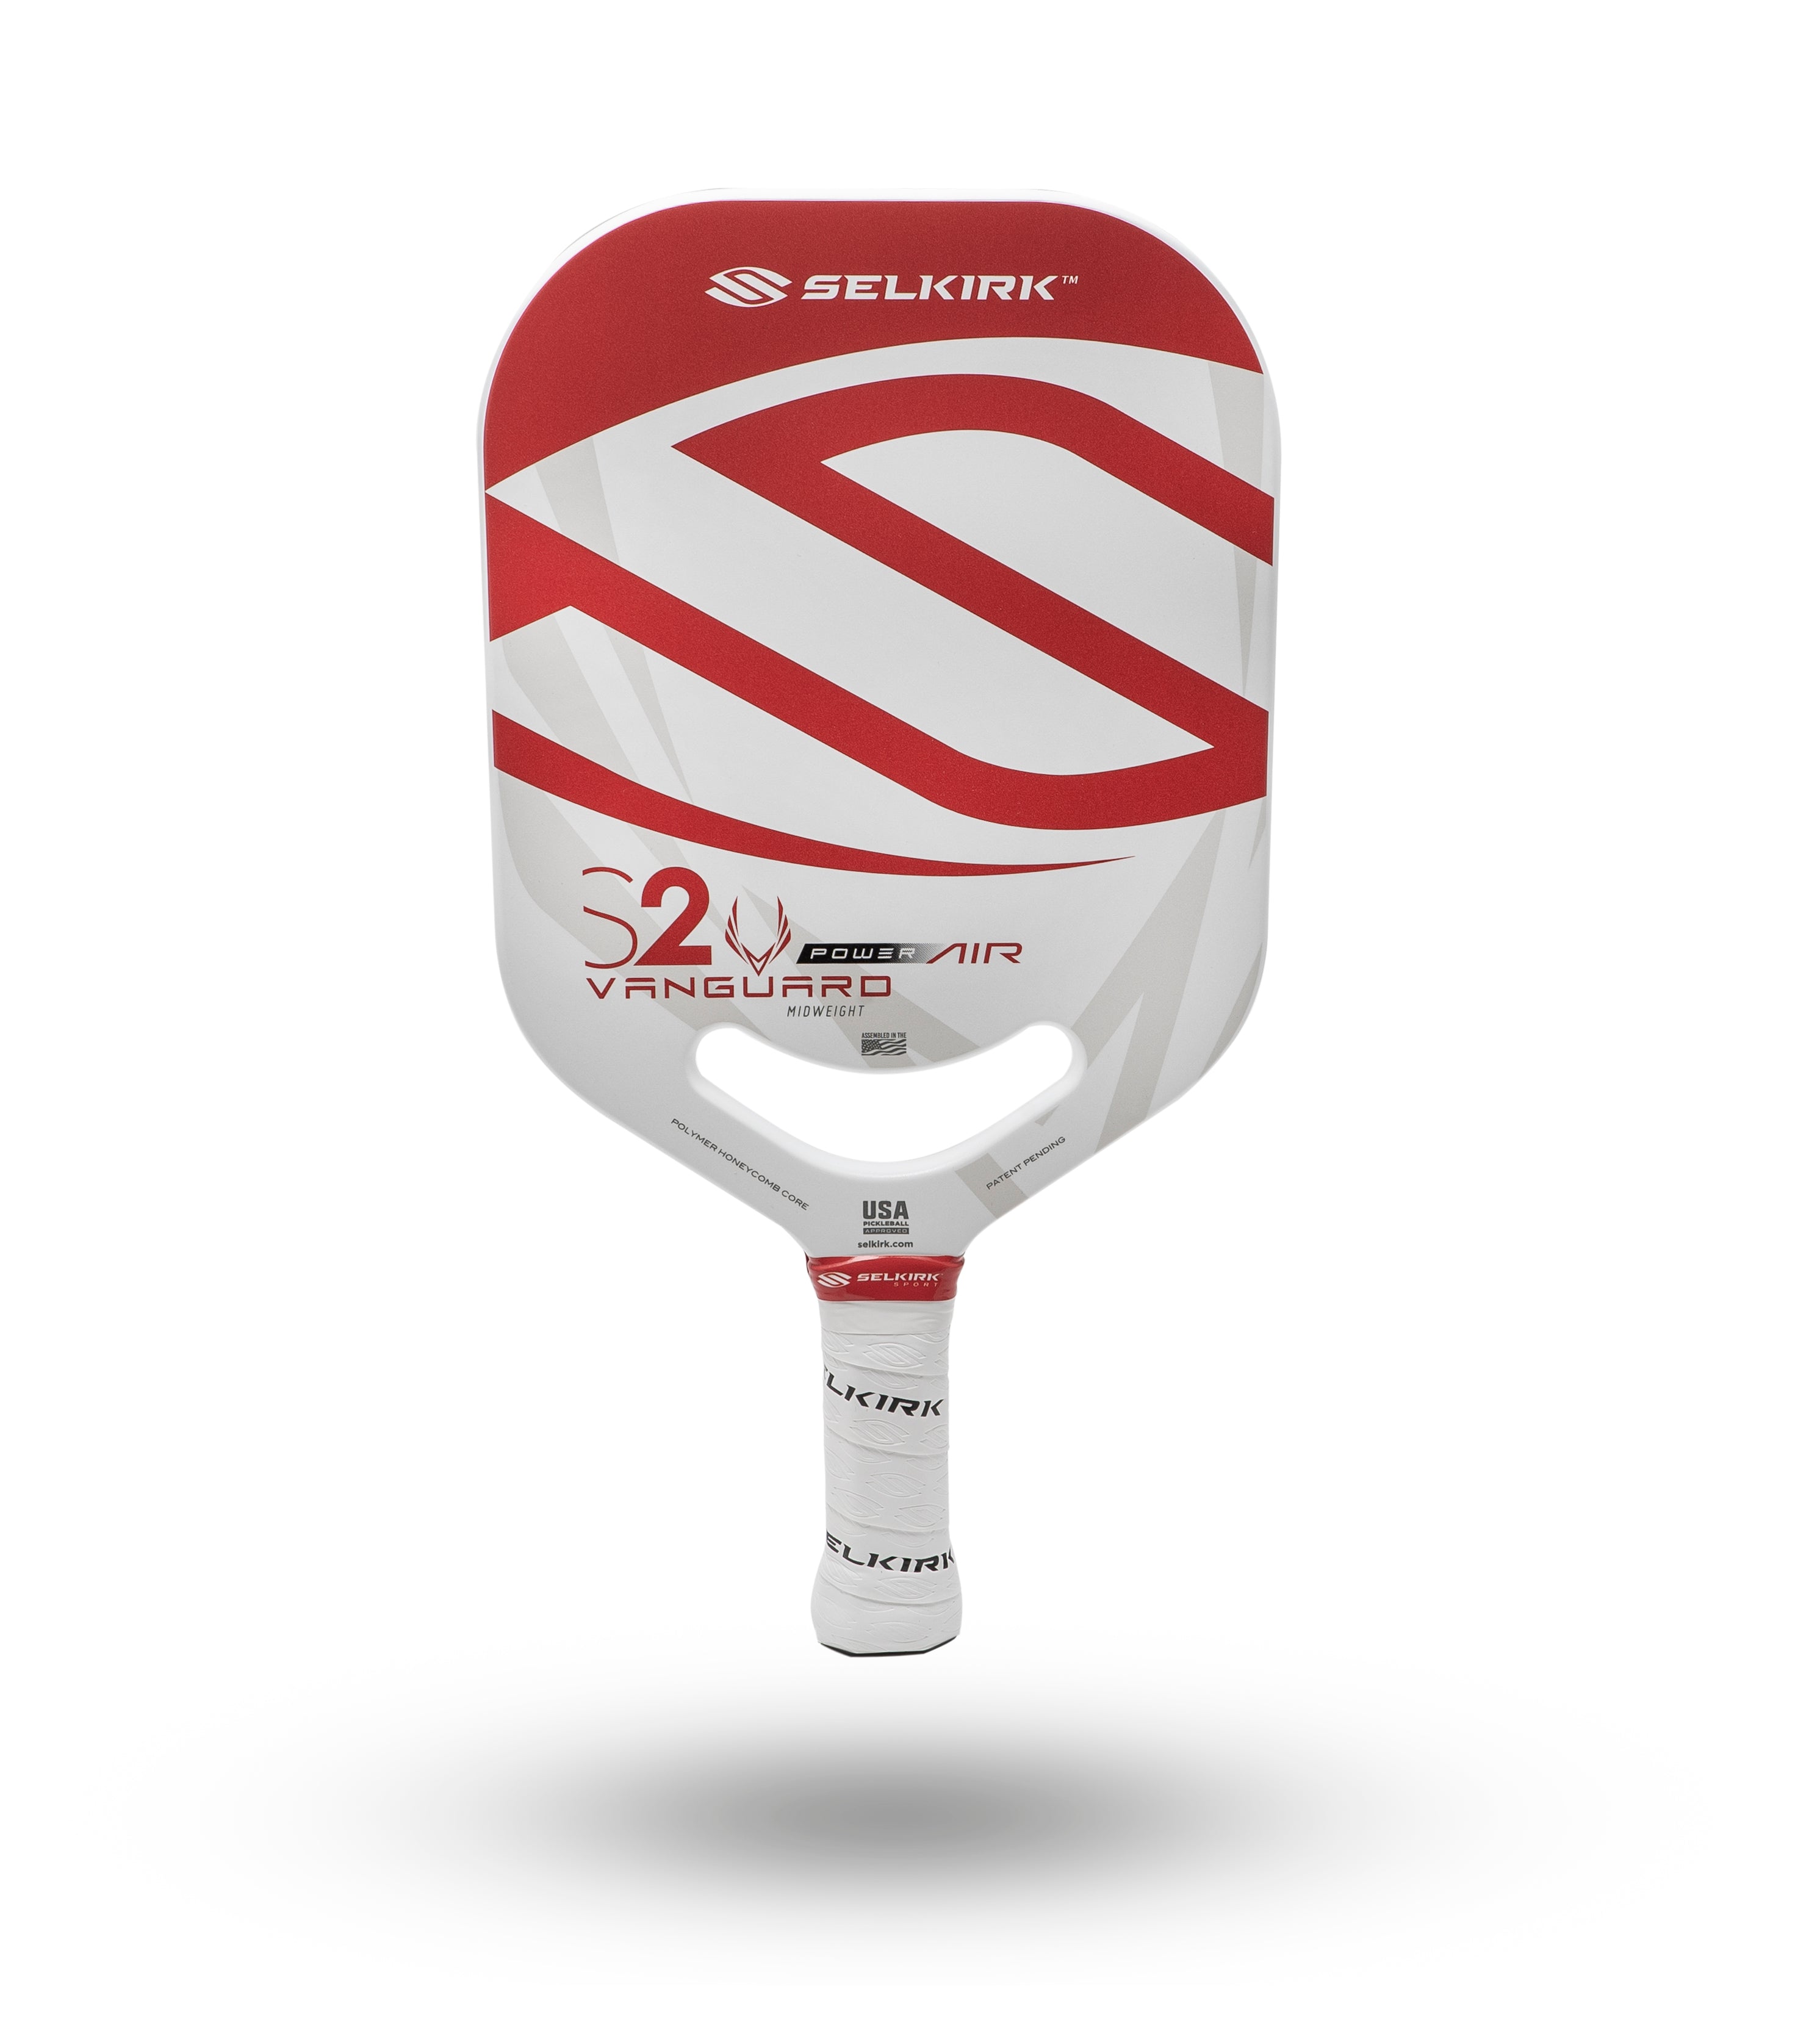 Selkirk Vanguard Power Air S2 Pickleball Paddle Midweight - Red/White